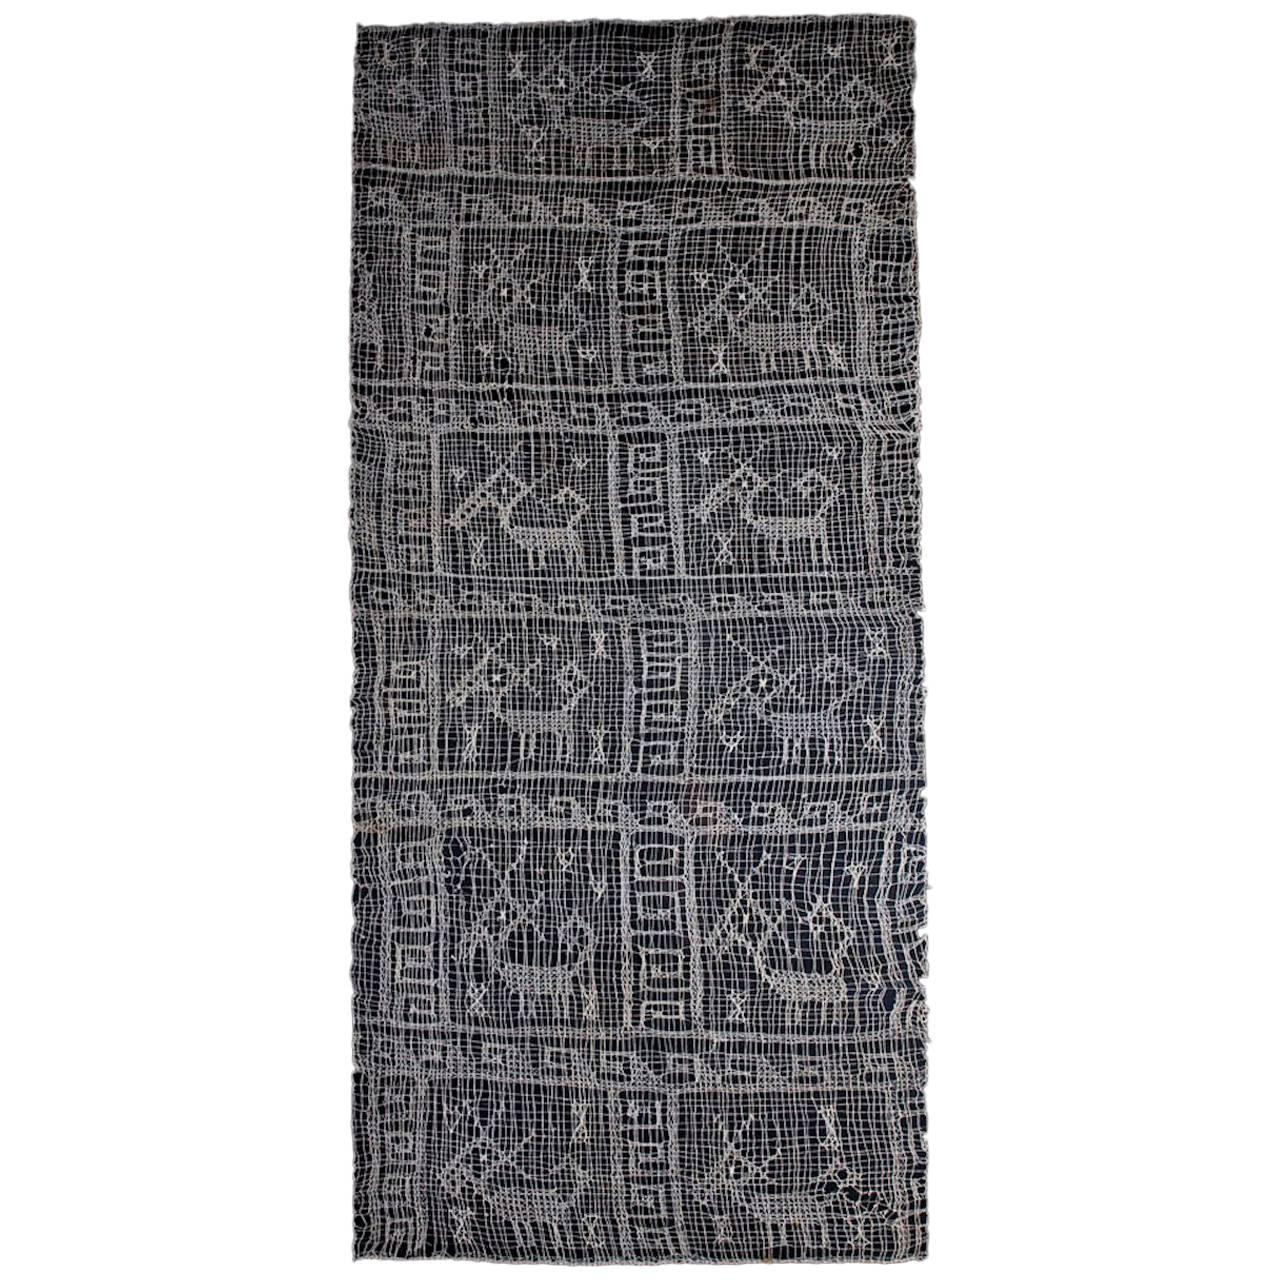 Pre-Columbian Chancay Gauze Textile with 12 Animals, Ex-Kate Kemper For Sale